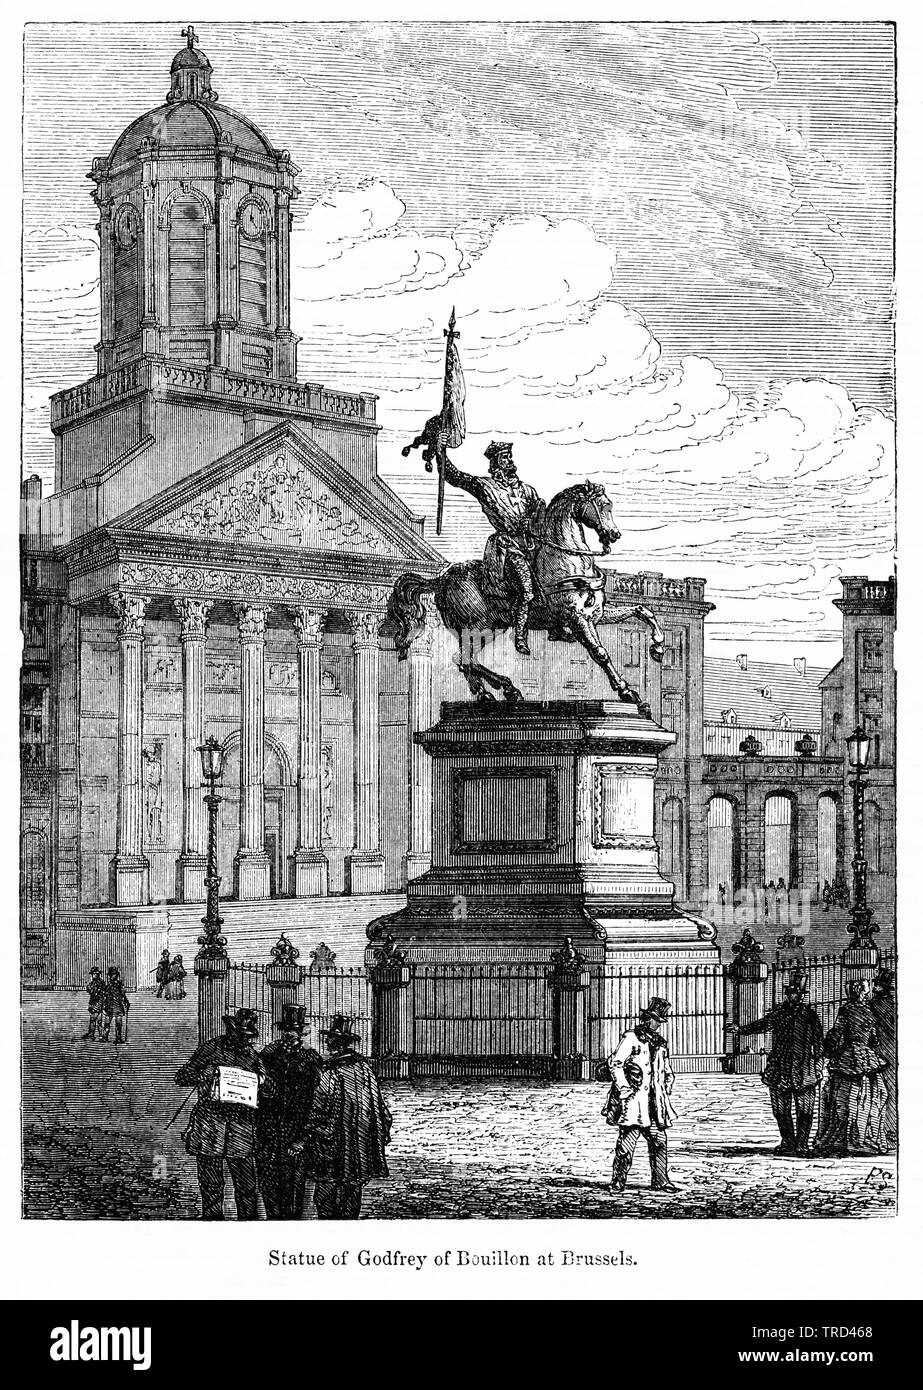 Statue of Godfrey of Bouillon at Brussels, Illustration from John Cassell's Illustrated History of England, Vol. I from the earliest period to the reign of Edward the Fourth, Cassell, Petter and Galpin, 1857 Stock Photo